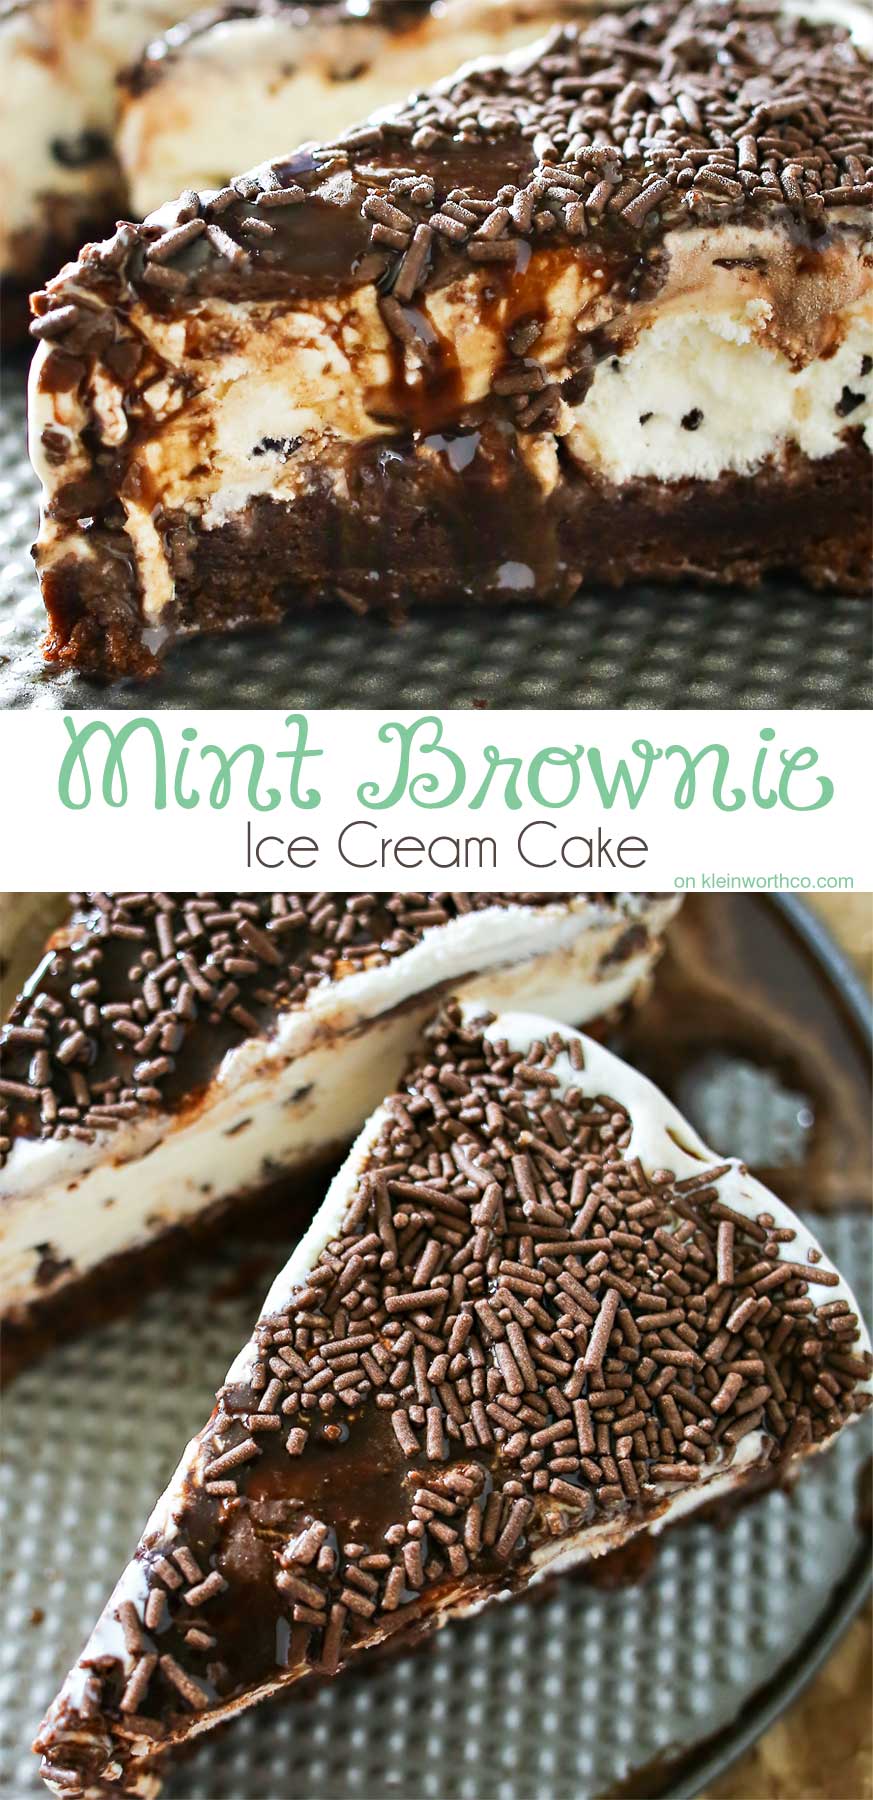 Making a homemade ice cream cake is easy. This Mint Brownie Ice Cream Cake has a brownie bottom layer & is topped with refreshing mint ice cream & chocolate syrup and sprinkles. It's an easy ice cream cake recipe that is perfect for birthdays, holidays like St. Patrick's Day or just because you love mint & chocolate together. It's out of this world! 